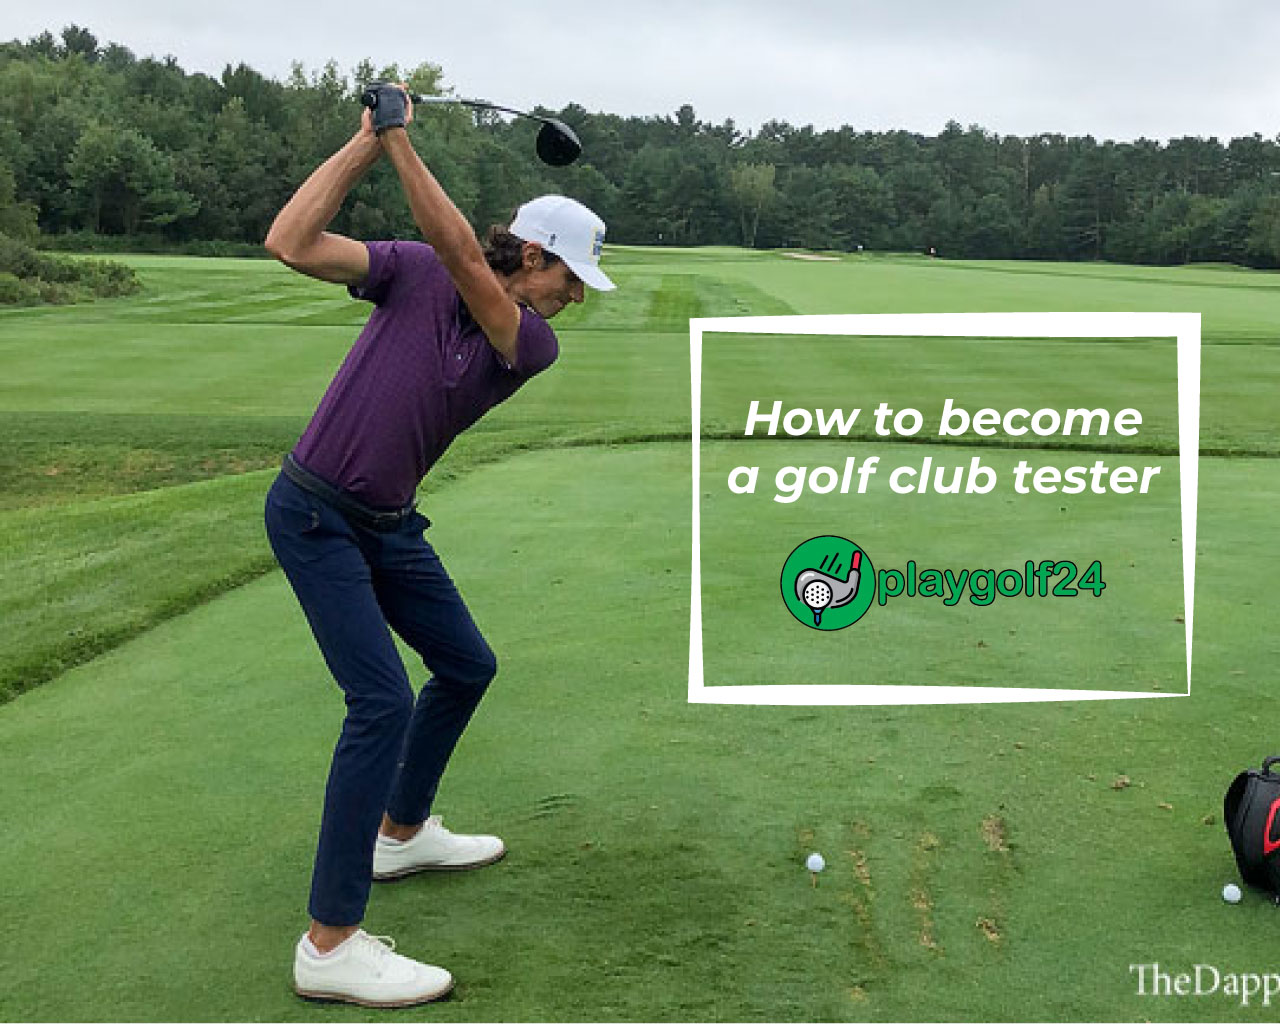 How to become a golf club tester